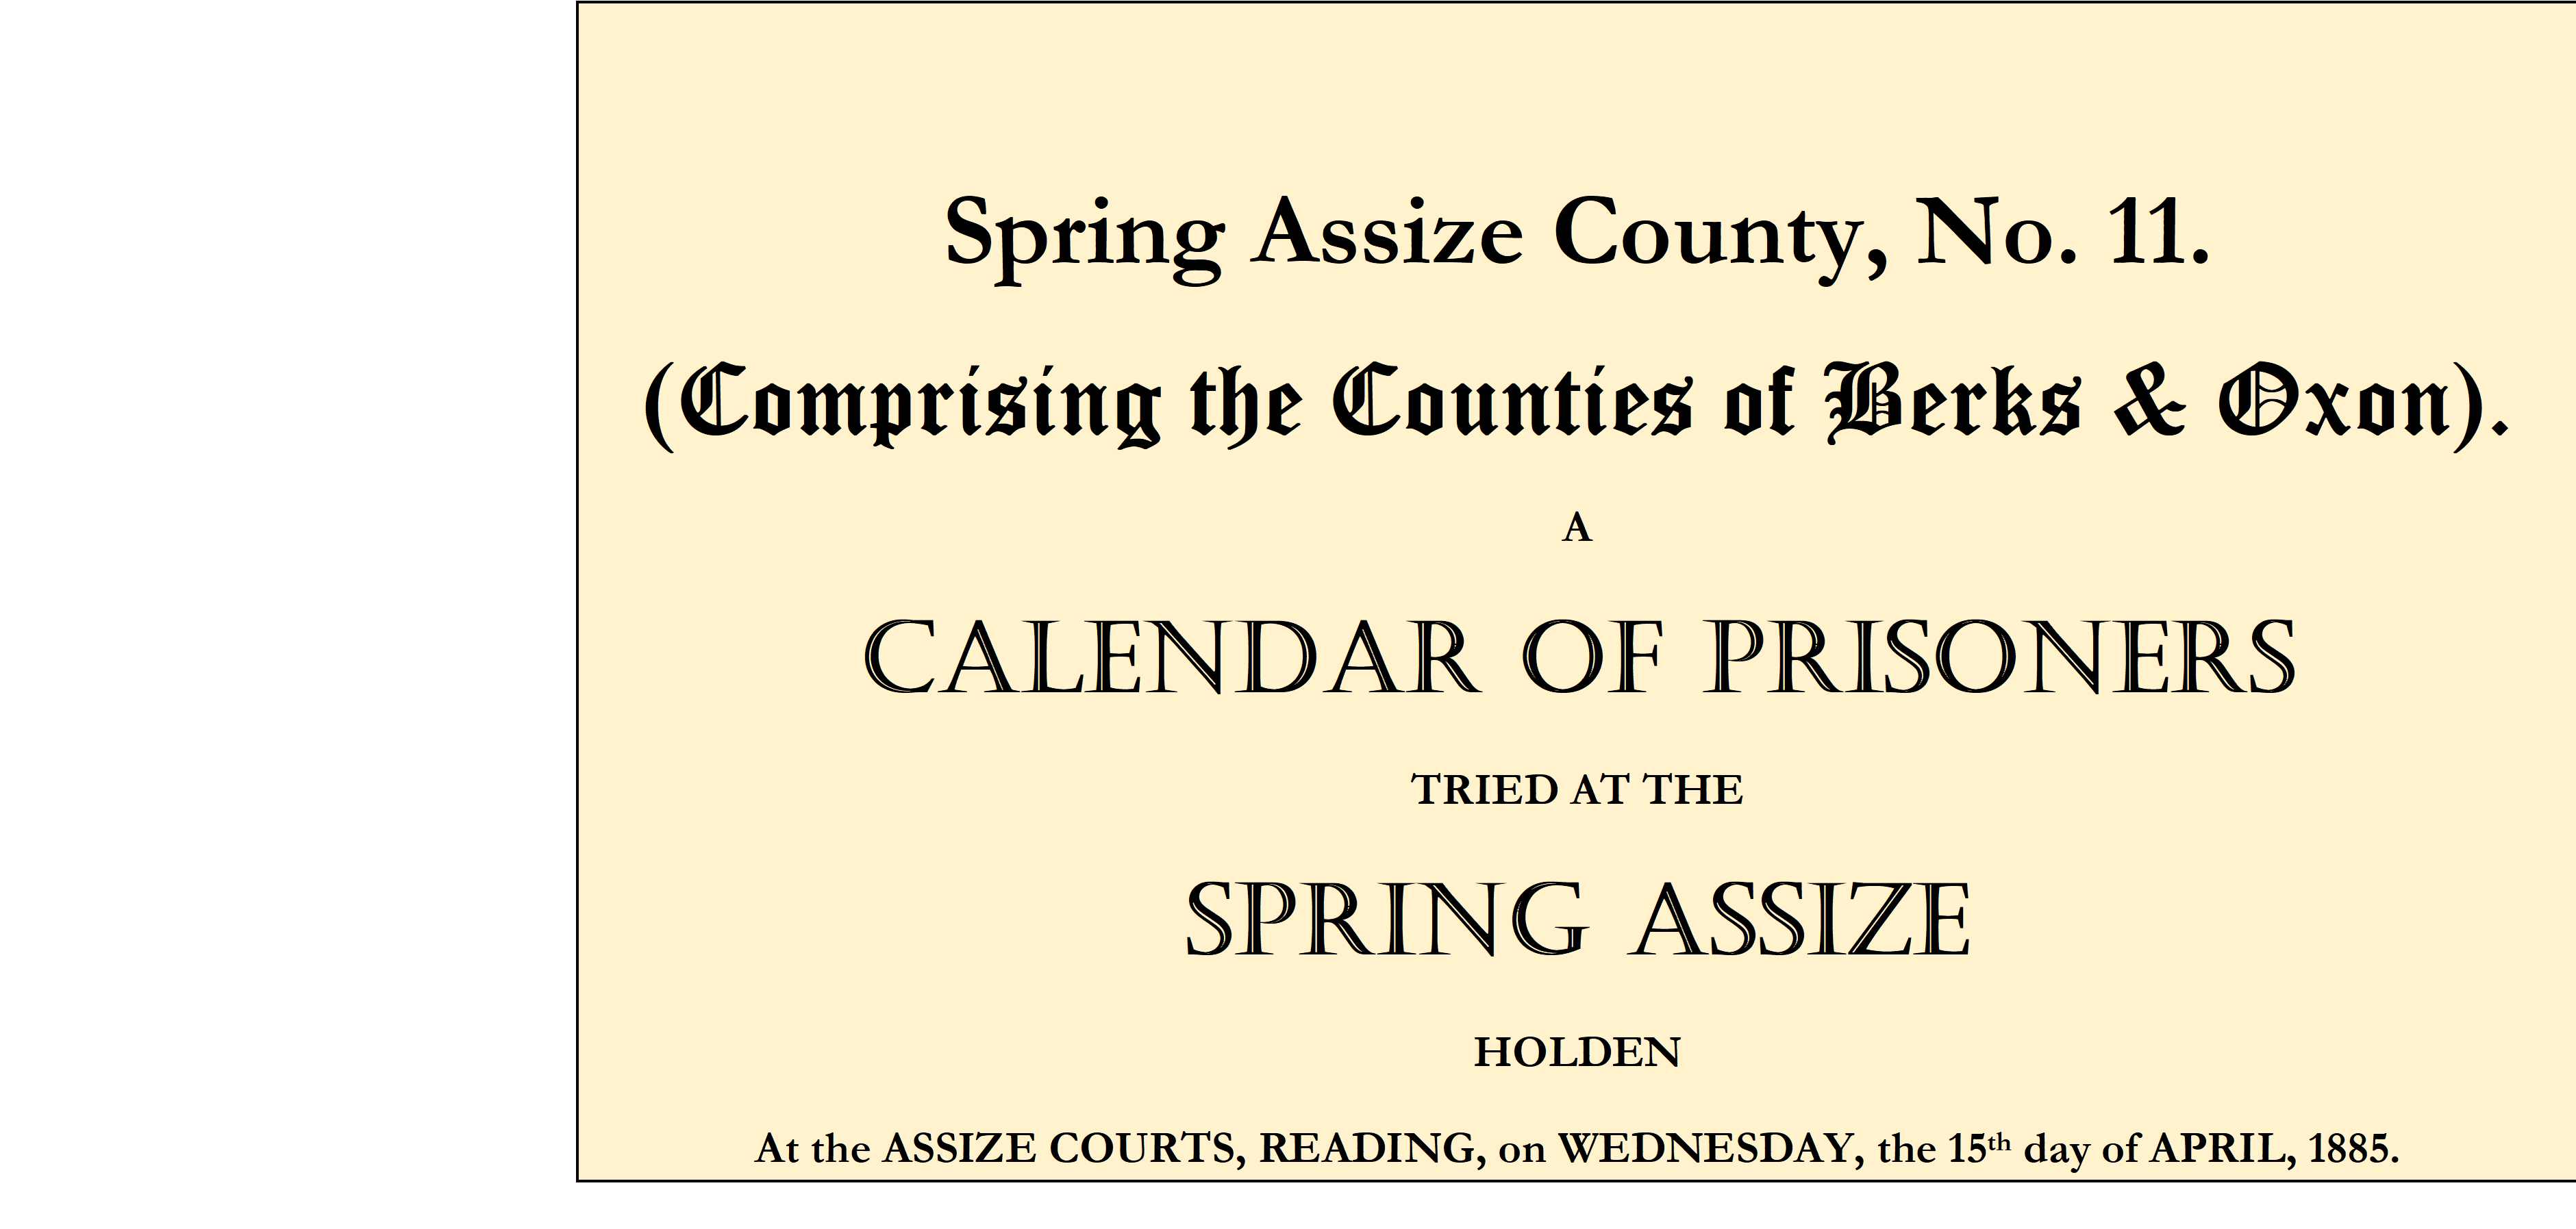  Spring Assize County, No. 11. (Comprising the Counties of Berks & Oxon). A CALENDAR OF PRISONERS TRIED AT THE SPRING ASSIZE HOLDEN  At the ASSIZE COURTS, READING, on WEDNESDAY, the 15th day of APRIL, 1885.